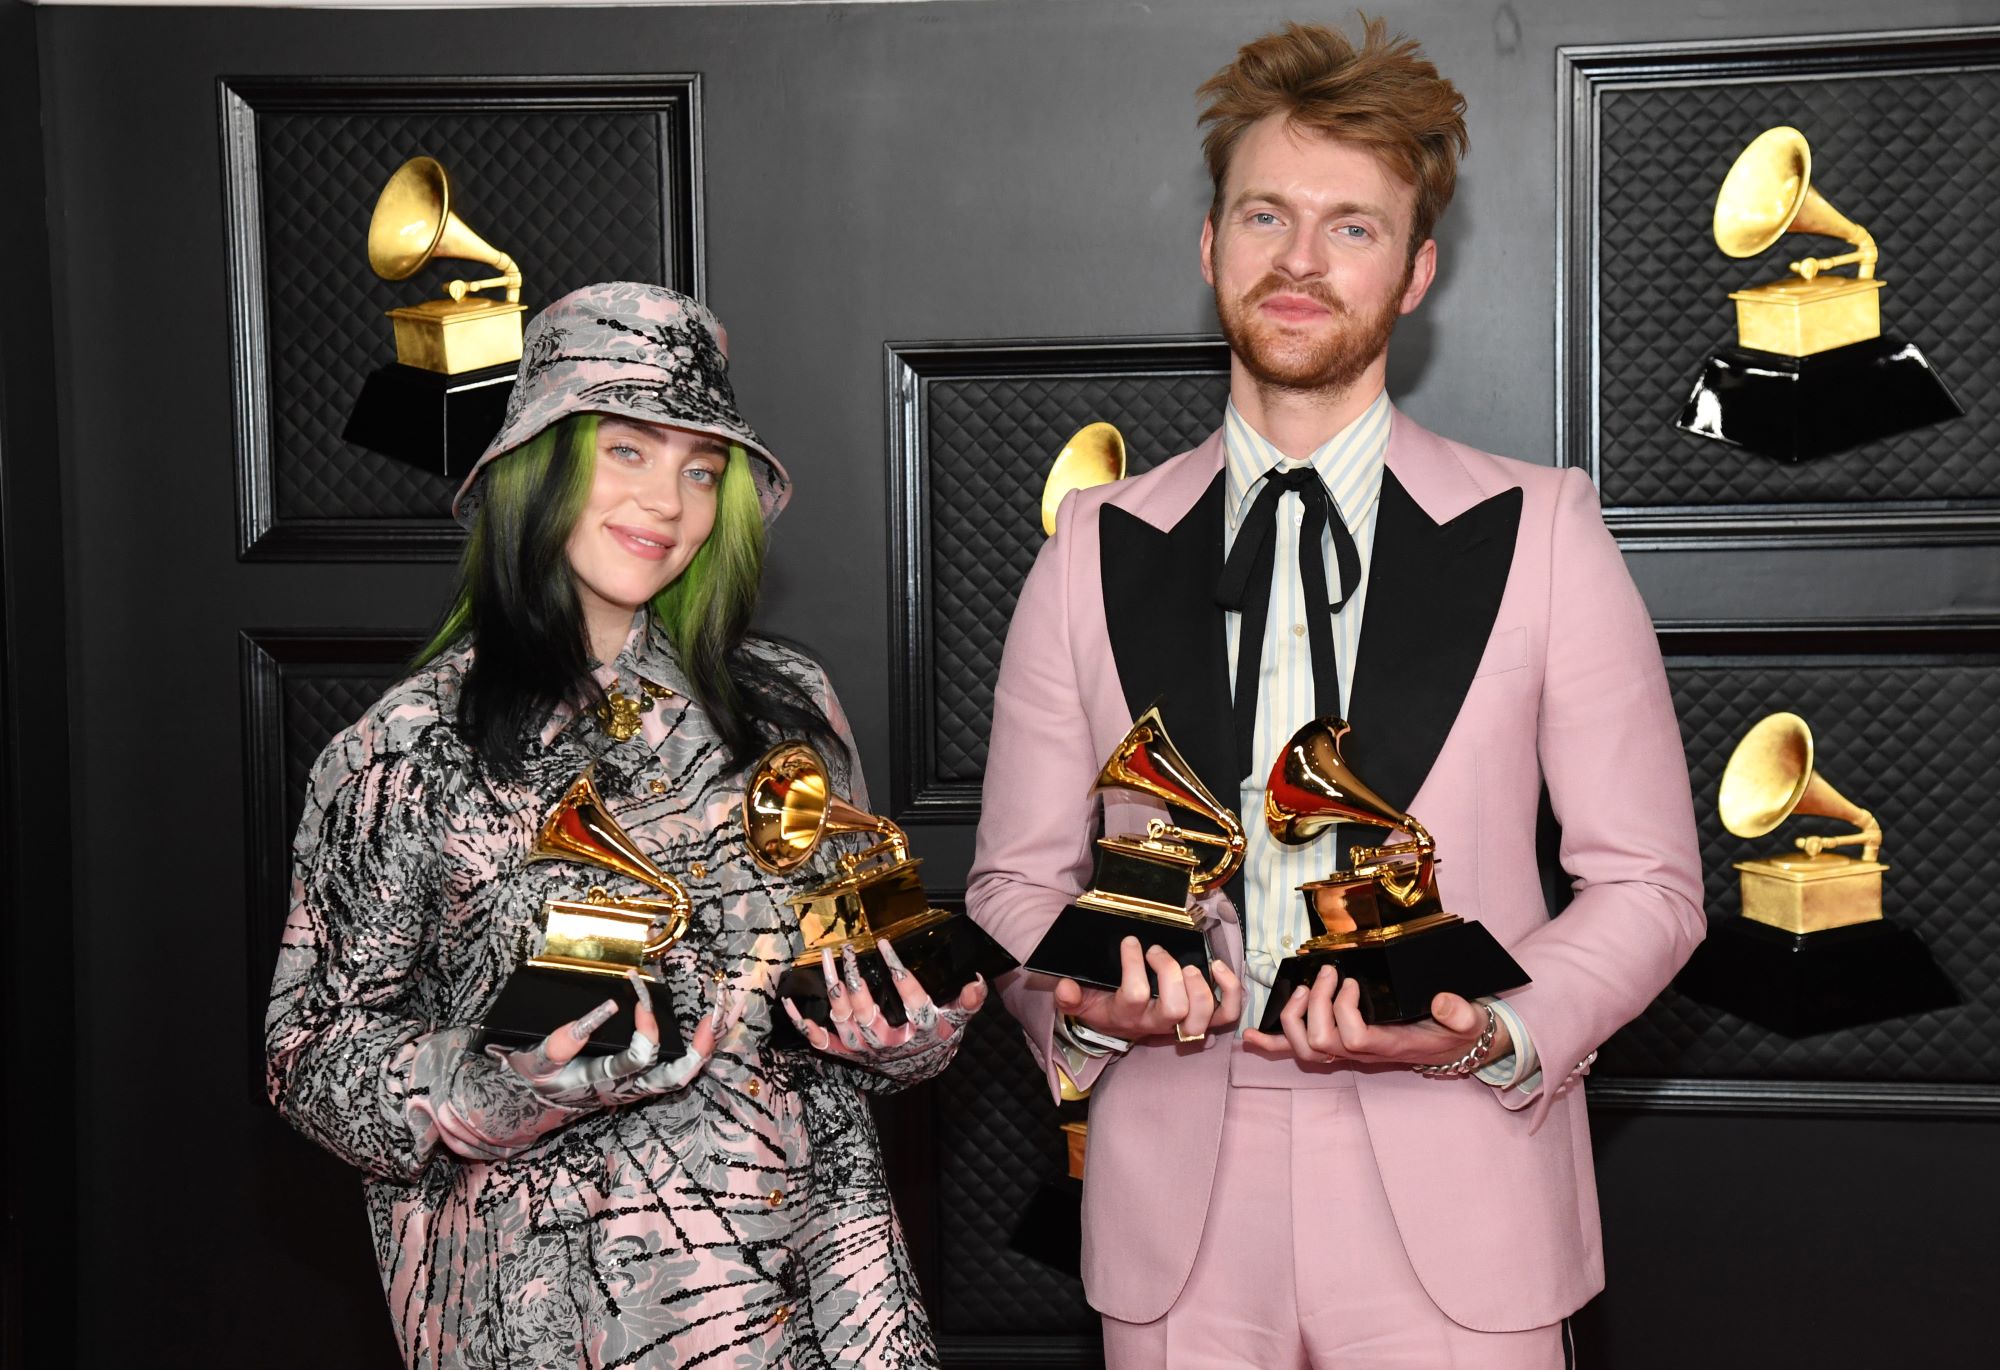 Billie Eilish dressed in a black grey and pink pattern outfit holding grammy awards next to her brother who is wearing a pink suit with a black collar and Texan bow tie with a white undershirt holding more grammy awards standing in front of a grey background.